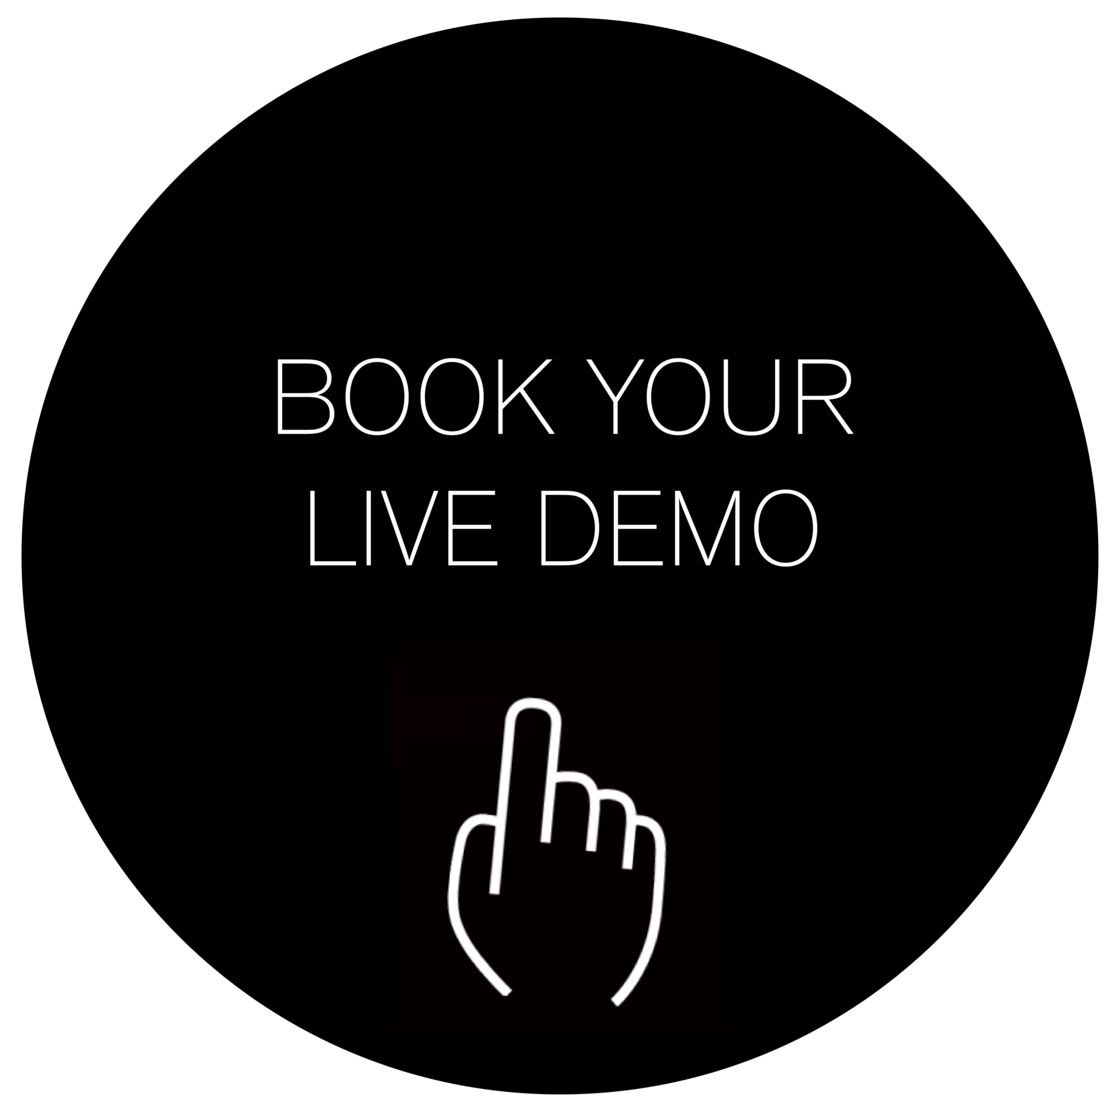 Request live demo for products